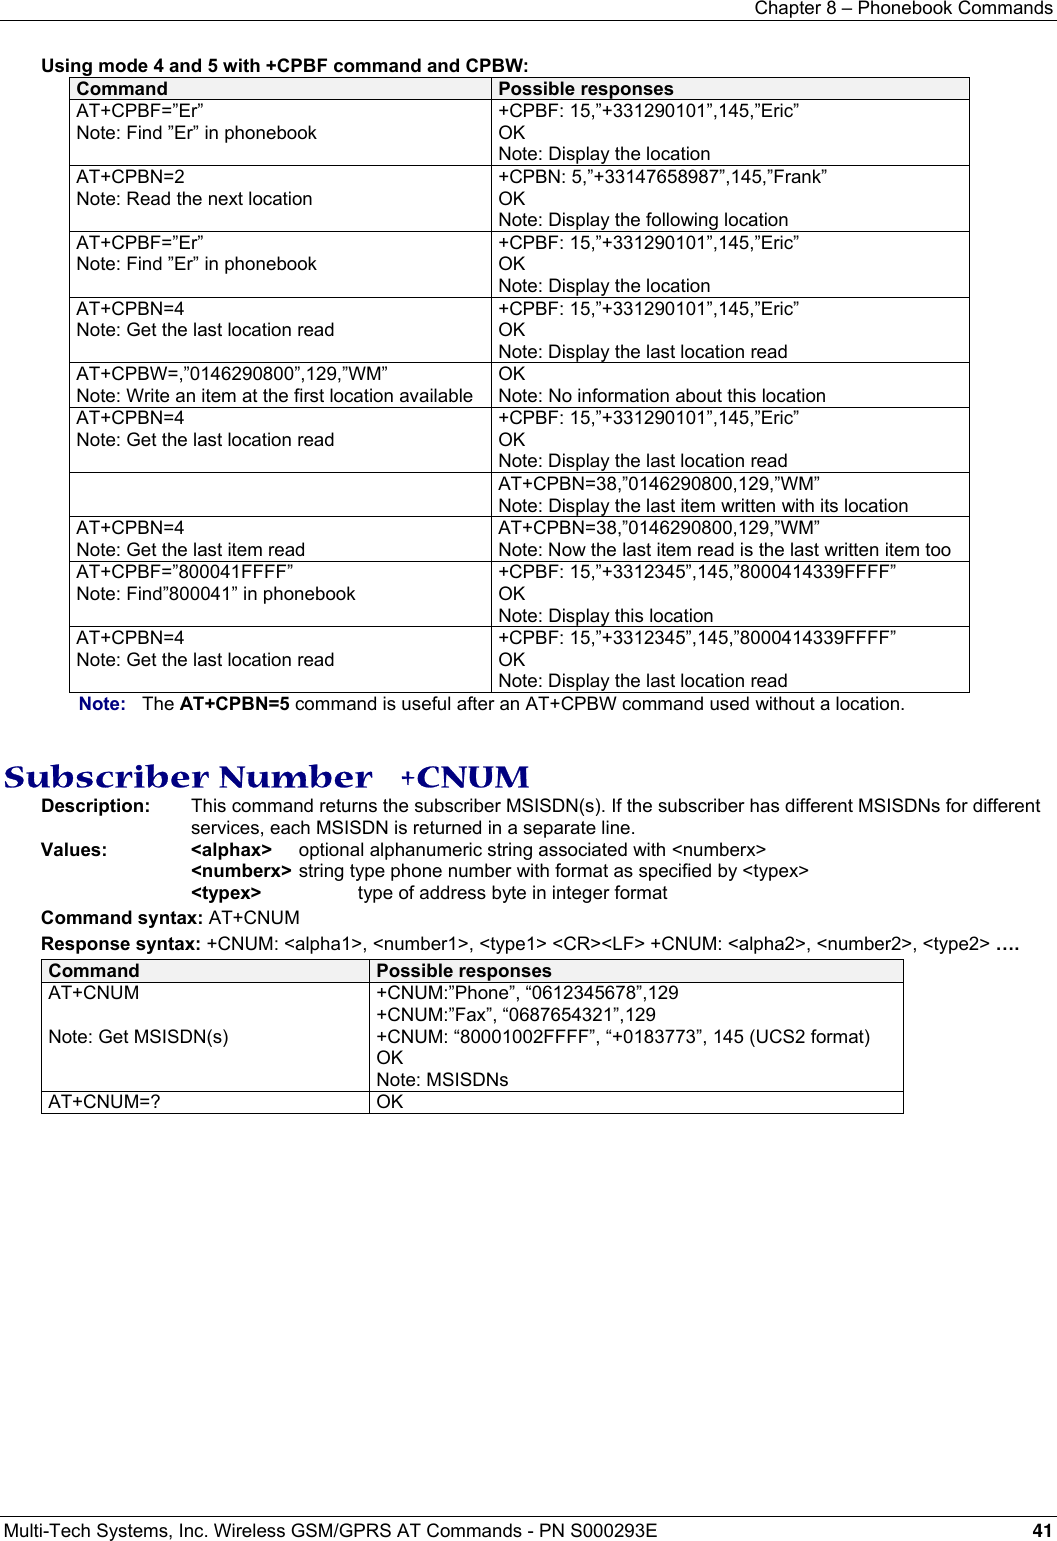 Chapter 8 – Phonebook Commands  Multi-Tech Systems, Inc. Wireless GSM/GPRS AT Commands - PN S000293E 41  Using mode 4 and 5 with +CPBF command and CPBW: Command  Possible responses AT+CPBF=”Er” Note: Find ”Er” in phonebook +CPBF: 15,”+331290101”,145,”Eric” OK Note: Display the location AT+CPBN=2 Note: Read the next location +CPBN: 5,”+33147658987”,145,”Frank” OK Note: Display the following location AT+CPBF=”Er” Note: Find ”Er” in phonebook +CPBF: 15,”+331290101”,145,”Eric” OK Note: Display the location AT+CPBN=4 Note: Get the last location read +CPBF: 15,”+331290101”,145,”Eric” OK Note: Display the last location read AT+CPBW=,”0146290800”,129,”WM” Note: Write an item at the first location available OK Note: No information about this location AT+CPBN=4 Note: Get the last location read +CPBF: 15,”+331290101”,145,”Eric” OK Note: Display the last location read   AT+CPBN=38,”0146290800,129,”WM” Note: Display the last item written with its location AT+CPBN=4 Note: Get the last item read AT+CPBN=38,”0146290800,129,”WM” Note: Now the last item read is the last written item too AT+CPBF=”800041FFFF” Note: Find”800041” in phonebook +CPBF: 15,”+3312345”,145,”8000414339FFFF” OK Note: Display this location AT+CPBN=4 Note: Get the last location read +CPBF: 15,”+3312345”,145,”8000414339FFFF” OK Note: Display the last location read Note:   The AT+CPBN=5 command is useful after an AT+CPBW command used without a location.  Subscriber Number   +CNUM Description:  This command returns the subscriber MSISDN(s). If the subscriber has different MSISDNs for different services, each MSISDN is returned in a separate line.   Values: &lt;alphax&gt;  optional alphanumeric string associated with &lt;numberx&gt;  &lt;numberx&gt; string type phone number with format as specified by &lt;typex&gt;  &lt;typex&gt;   type of address byte in integer format Command syntax: AT+CNUM Response syntax: +CNUM: &lt;alpha1&gt;, &lt;number1&gt;, &lt;type1&gt; &lt;CR&gt;&lt;LF&gt; +CNUM: &lt;alpha2&gt;, &lt;number2&gt;, &lt;type2&gt; …. Command  Possible responses AT+CNUM  Note: Get MSISDN(s) +CNUM:”Phone”, “0612345678”,129 +CNUM:”Fax”, “0687654321”,129 +CNUM: “80001002FFFF”, “+0183773”, 145 (UCS2 format) OK Note: MSISDNs AT+CNUM=? OK  